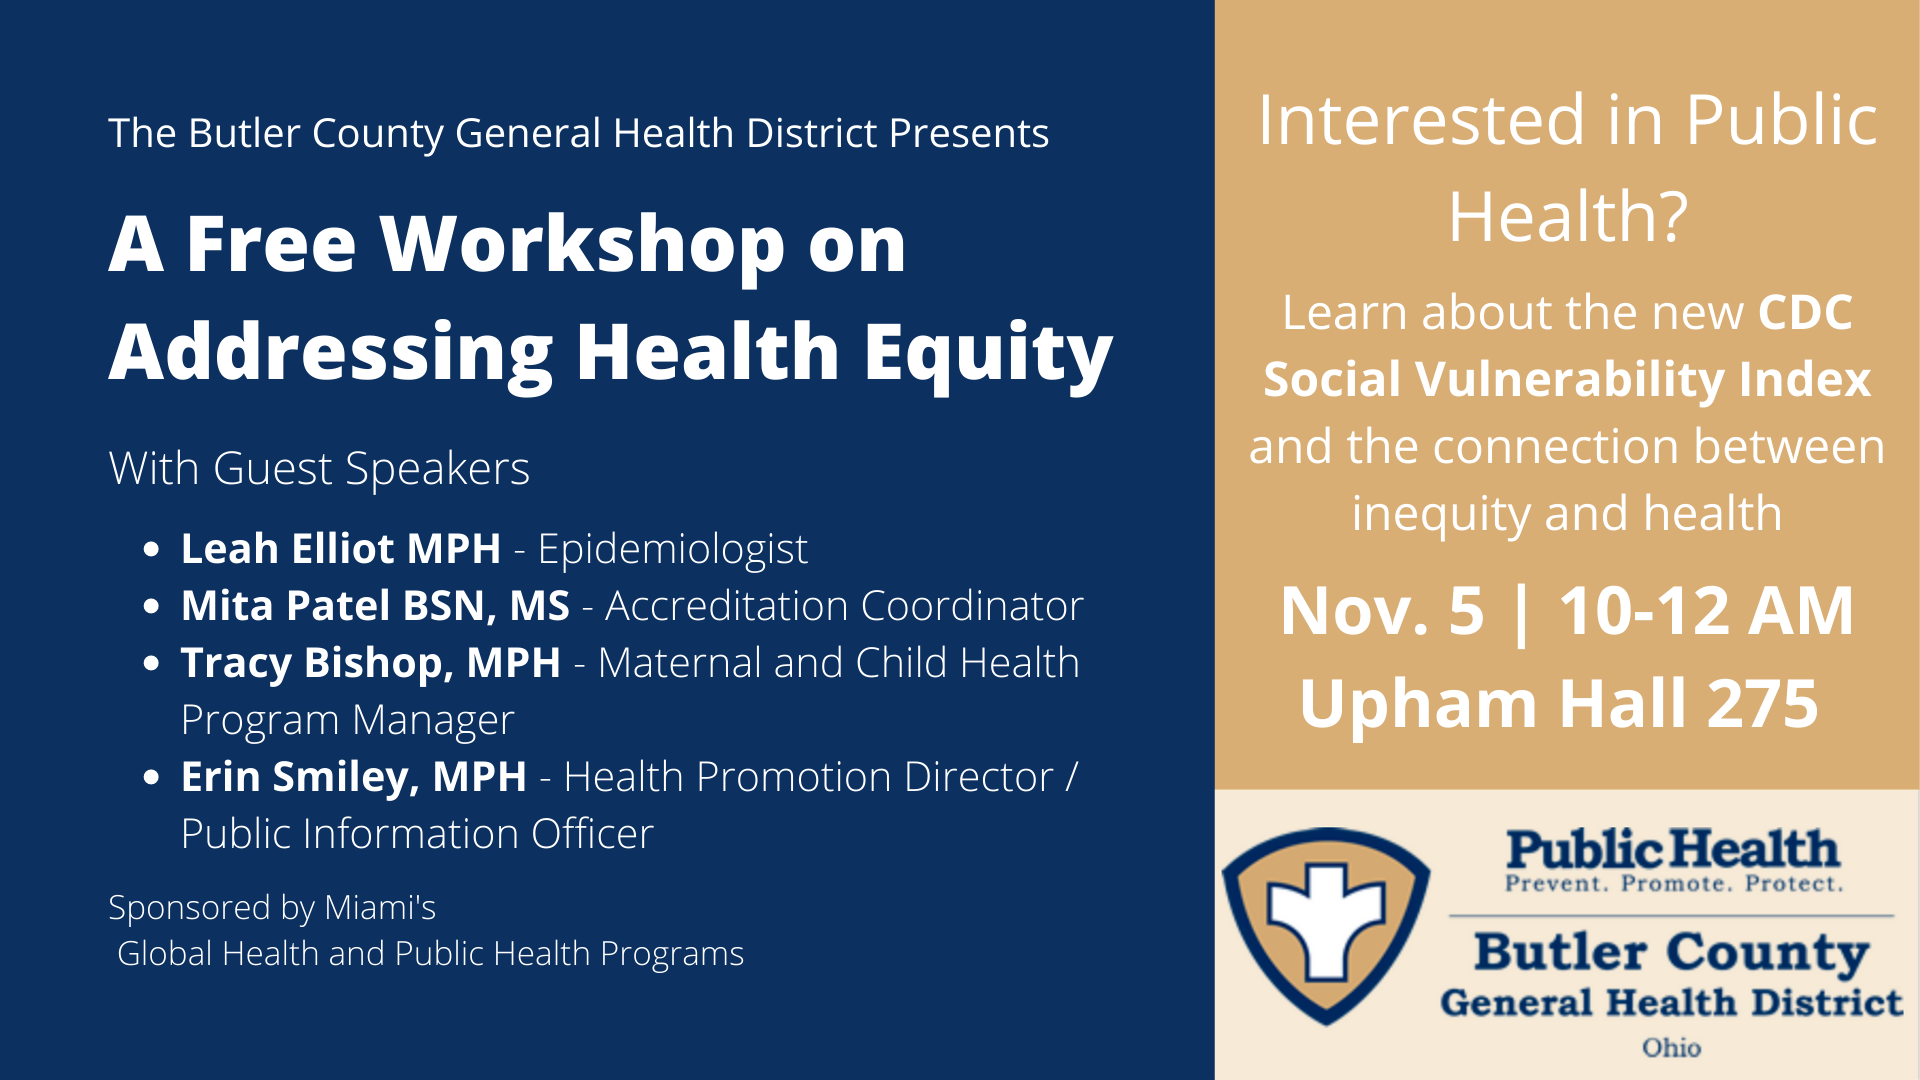 A free workshop on addressing health equity